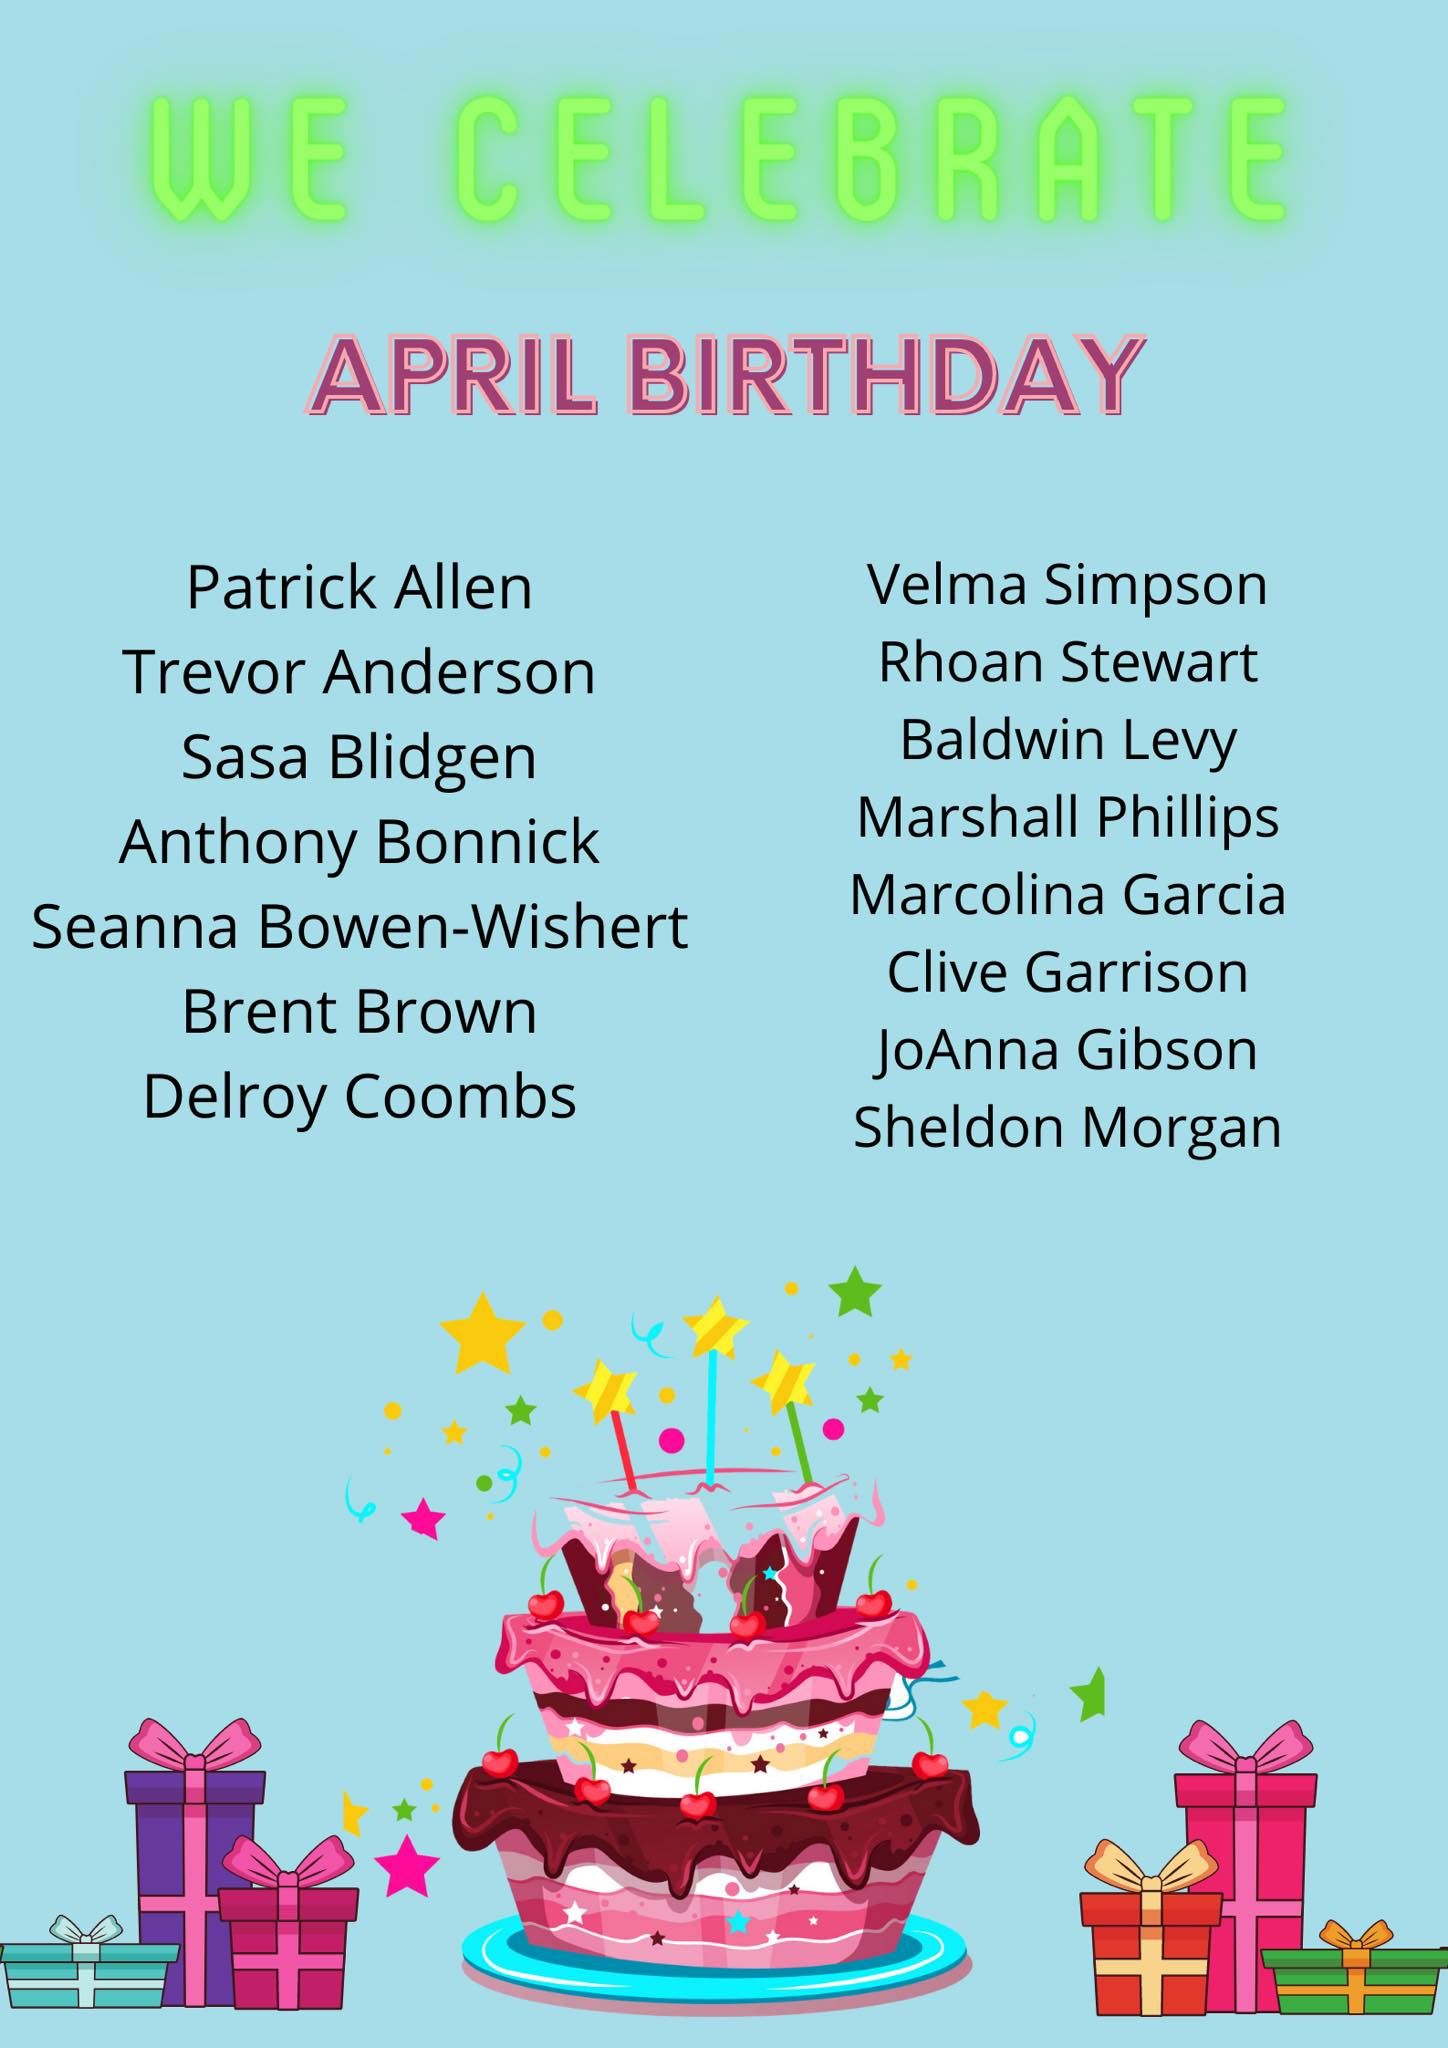 APRIL - Birthday Friday - West Indian Social Club - Every Month - For Everyone